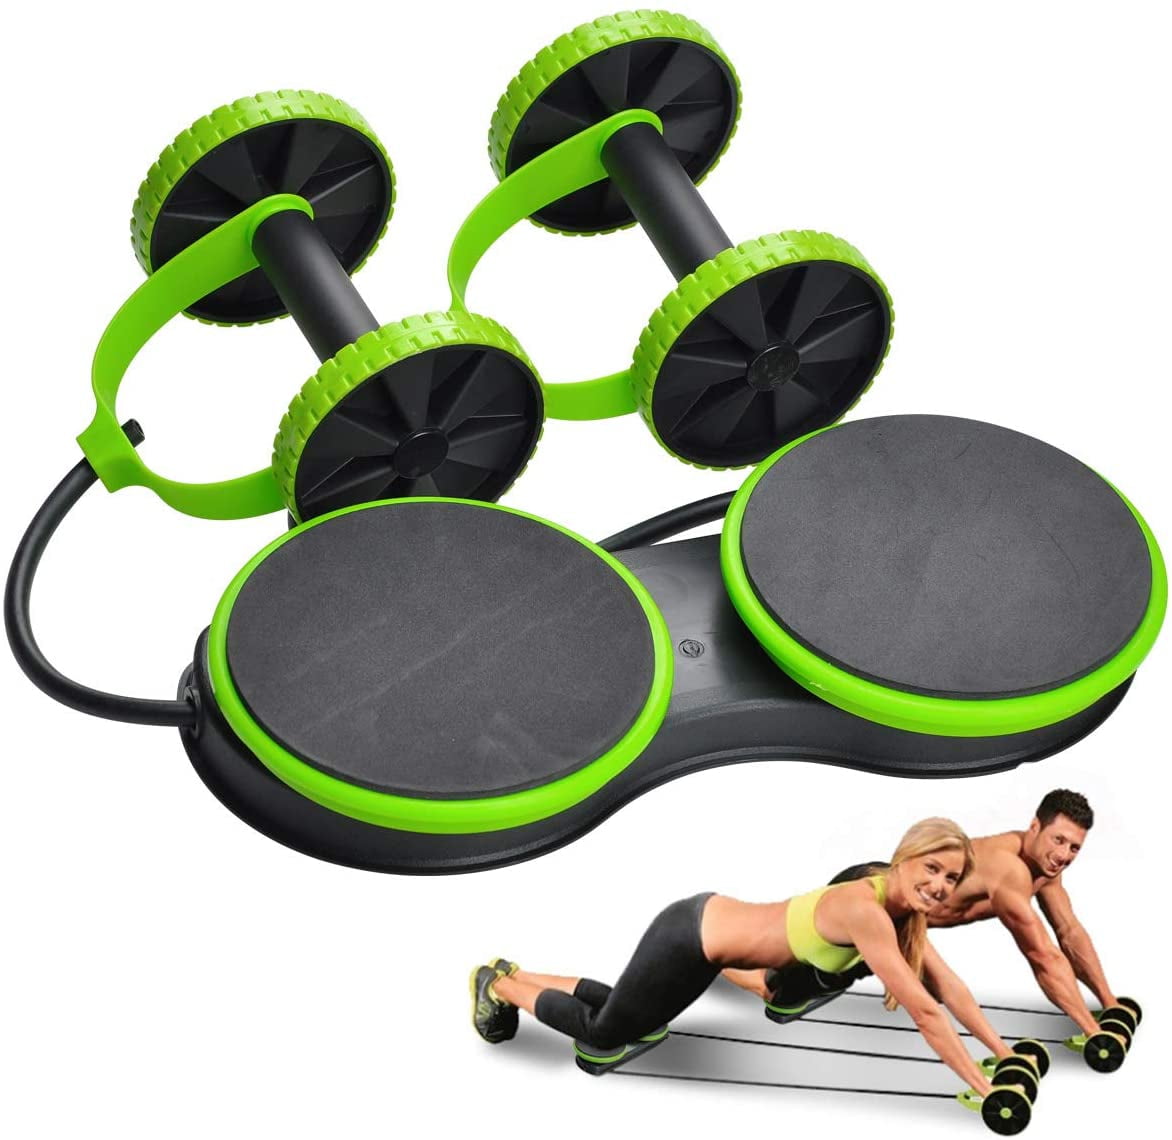 Exercise Fitness Abdominal Core Building Extra Wide Workout Ab Roller Wheel 